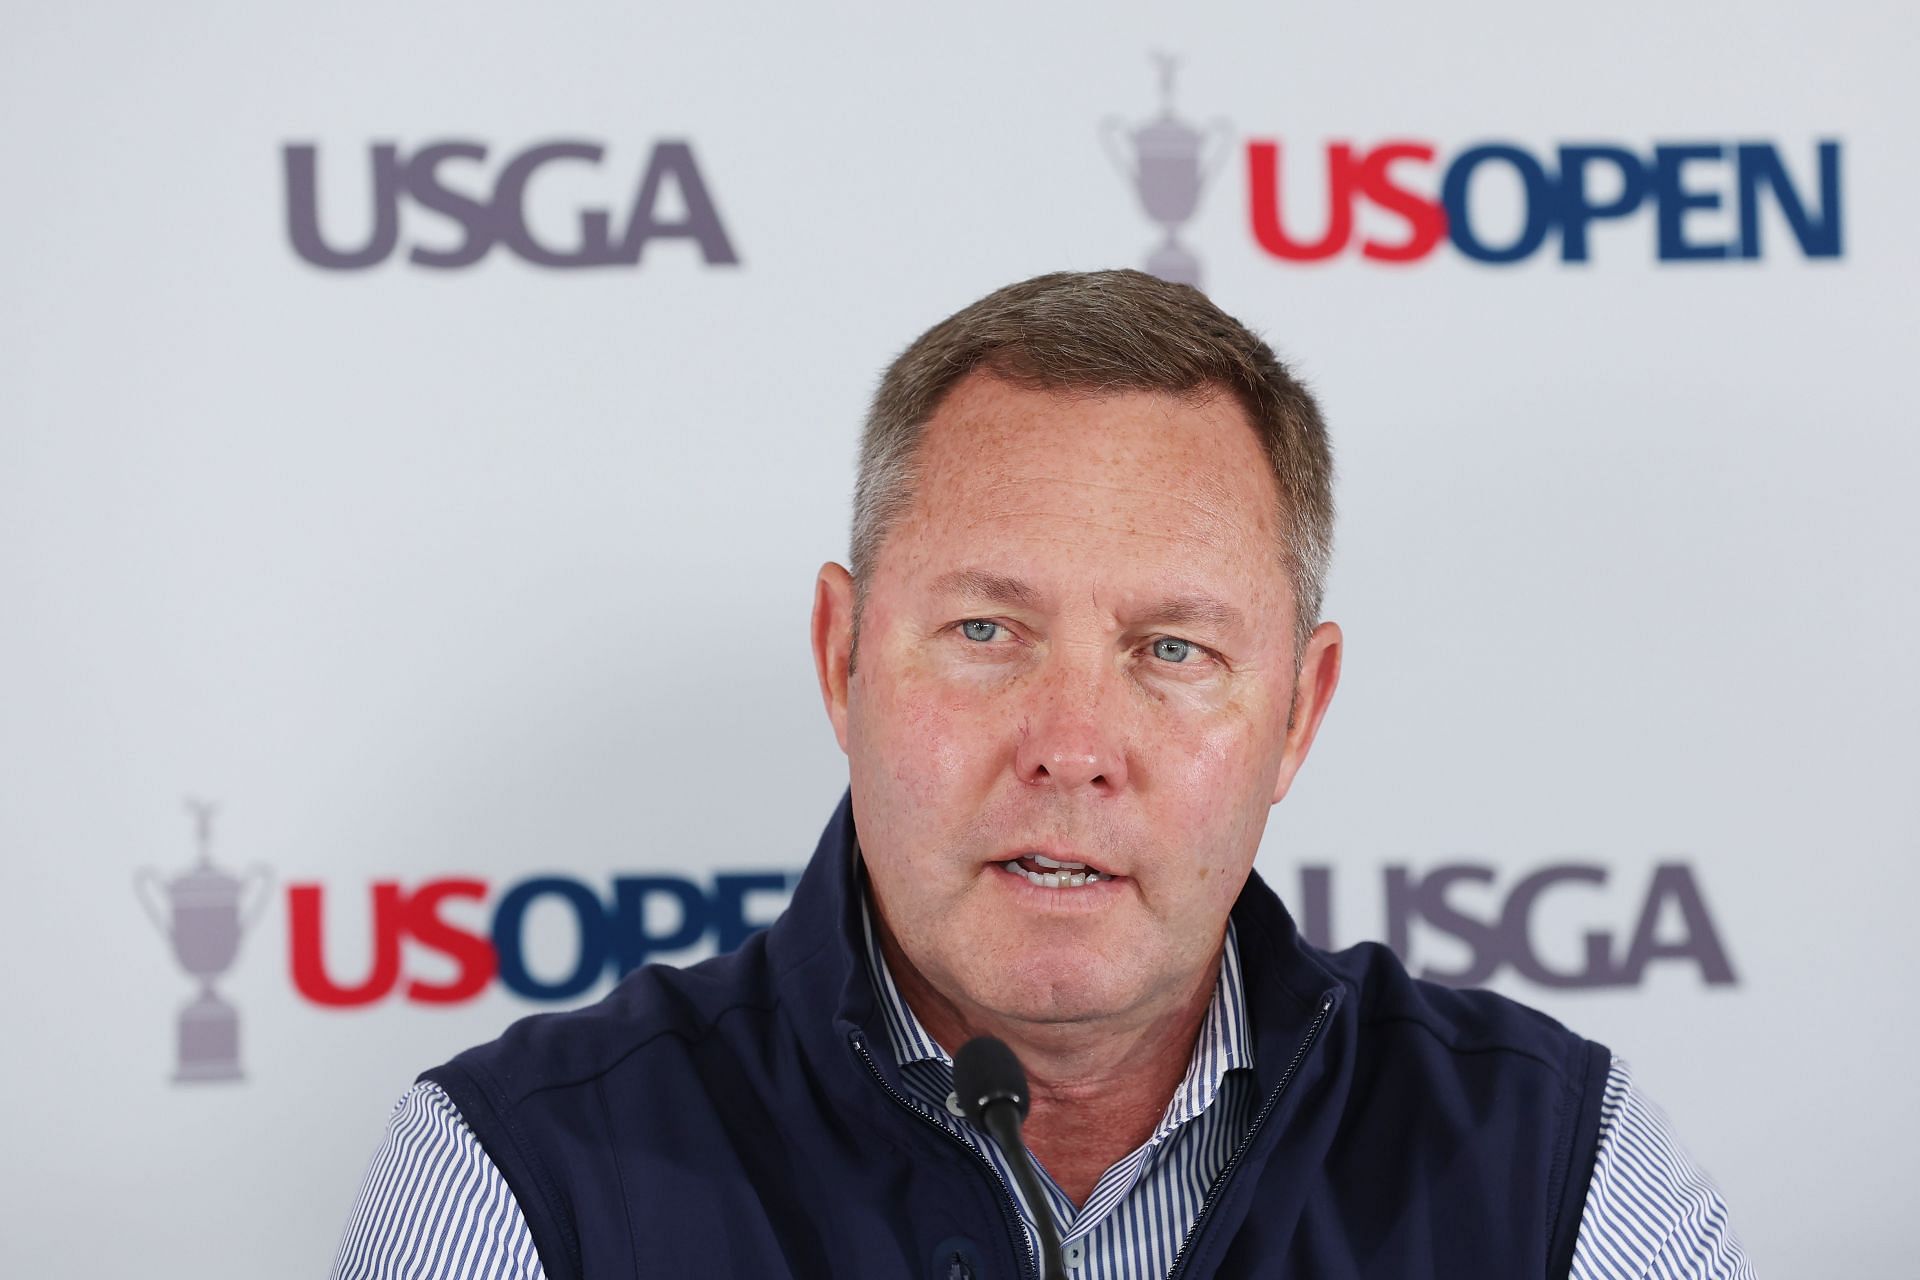 Mike Whan is the CEO of USGA